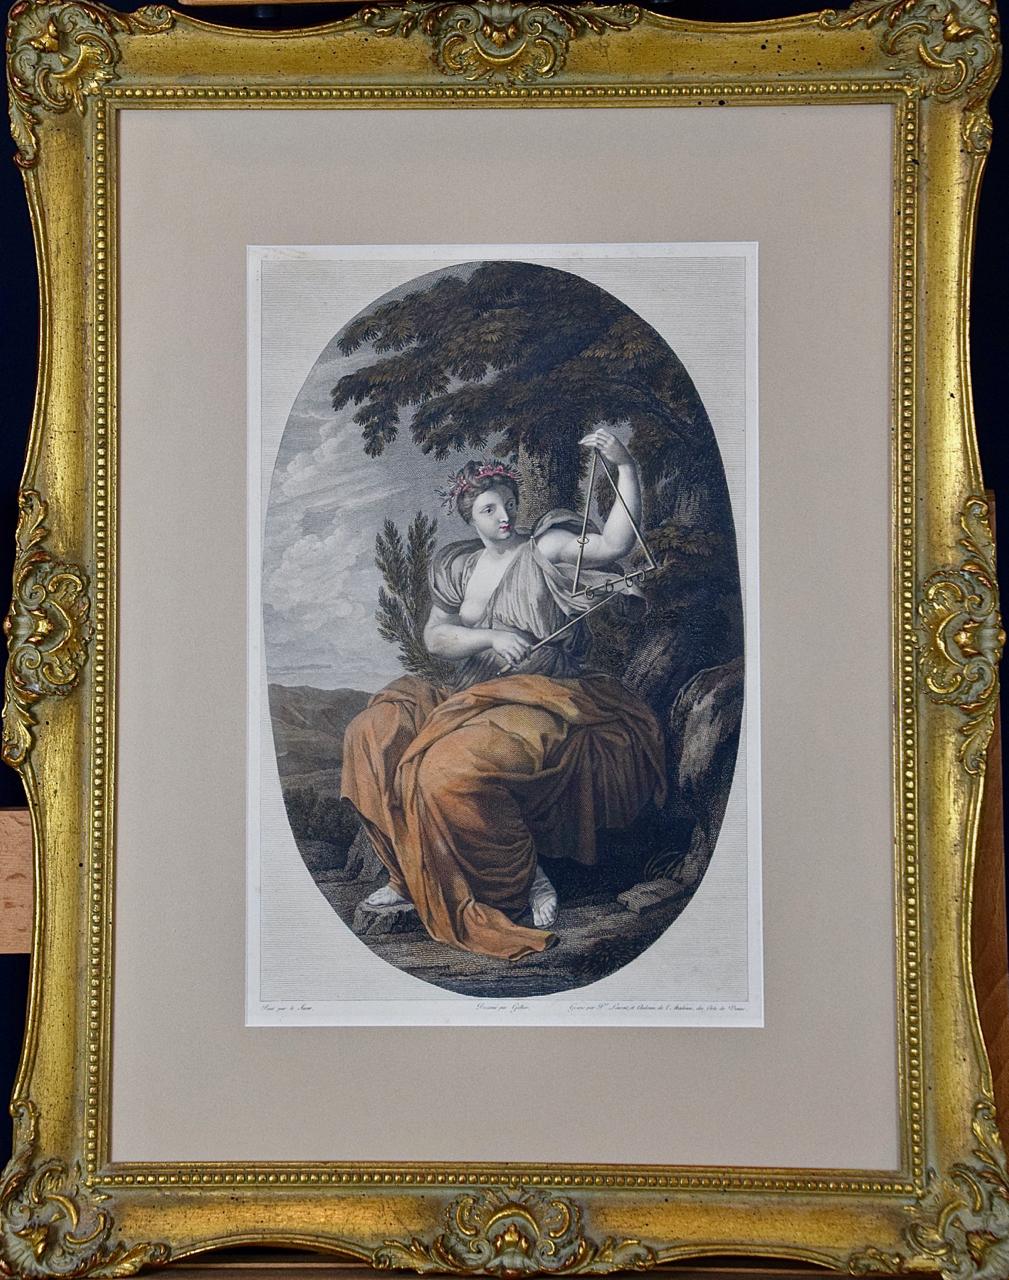 Muse Terpsichore: Framed Hand-colored 19th C. Engraving after 17th C. Painting 